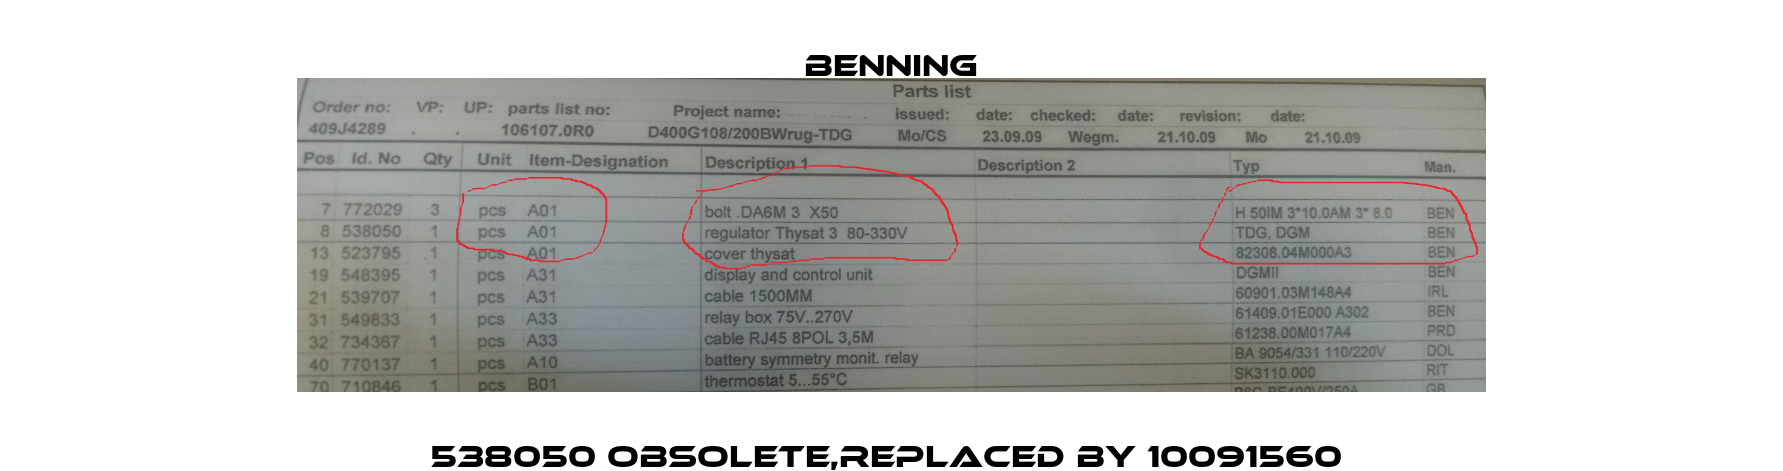 538050 obsolete,replaced by 10091560  Benning